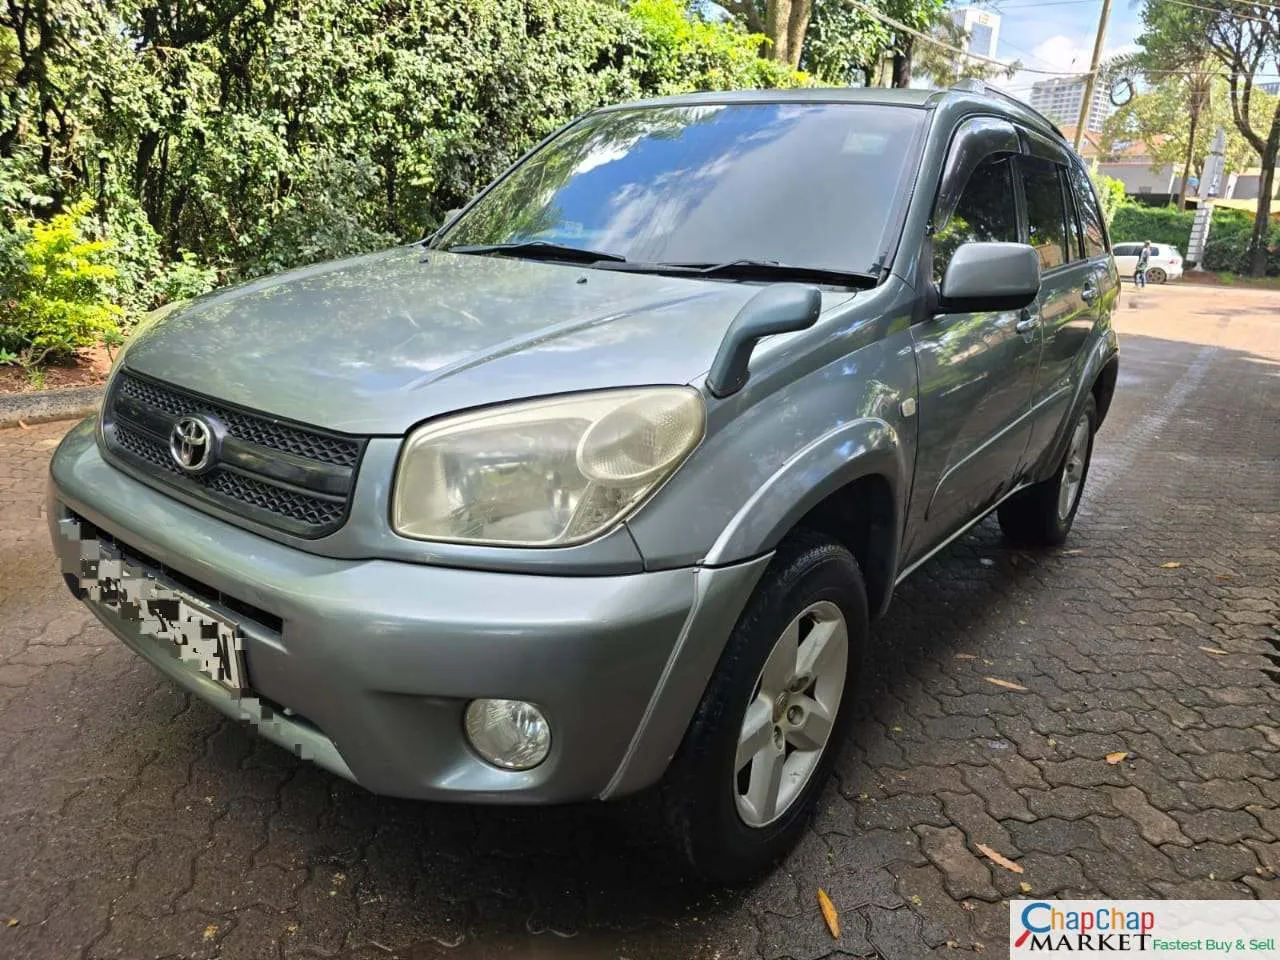 Cars For Sale Cars-Toyota RAV4 with SUNROOF You Pay 30% Deposit Trade in OK Hire purchase installments